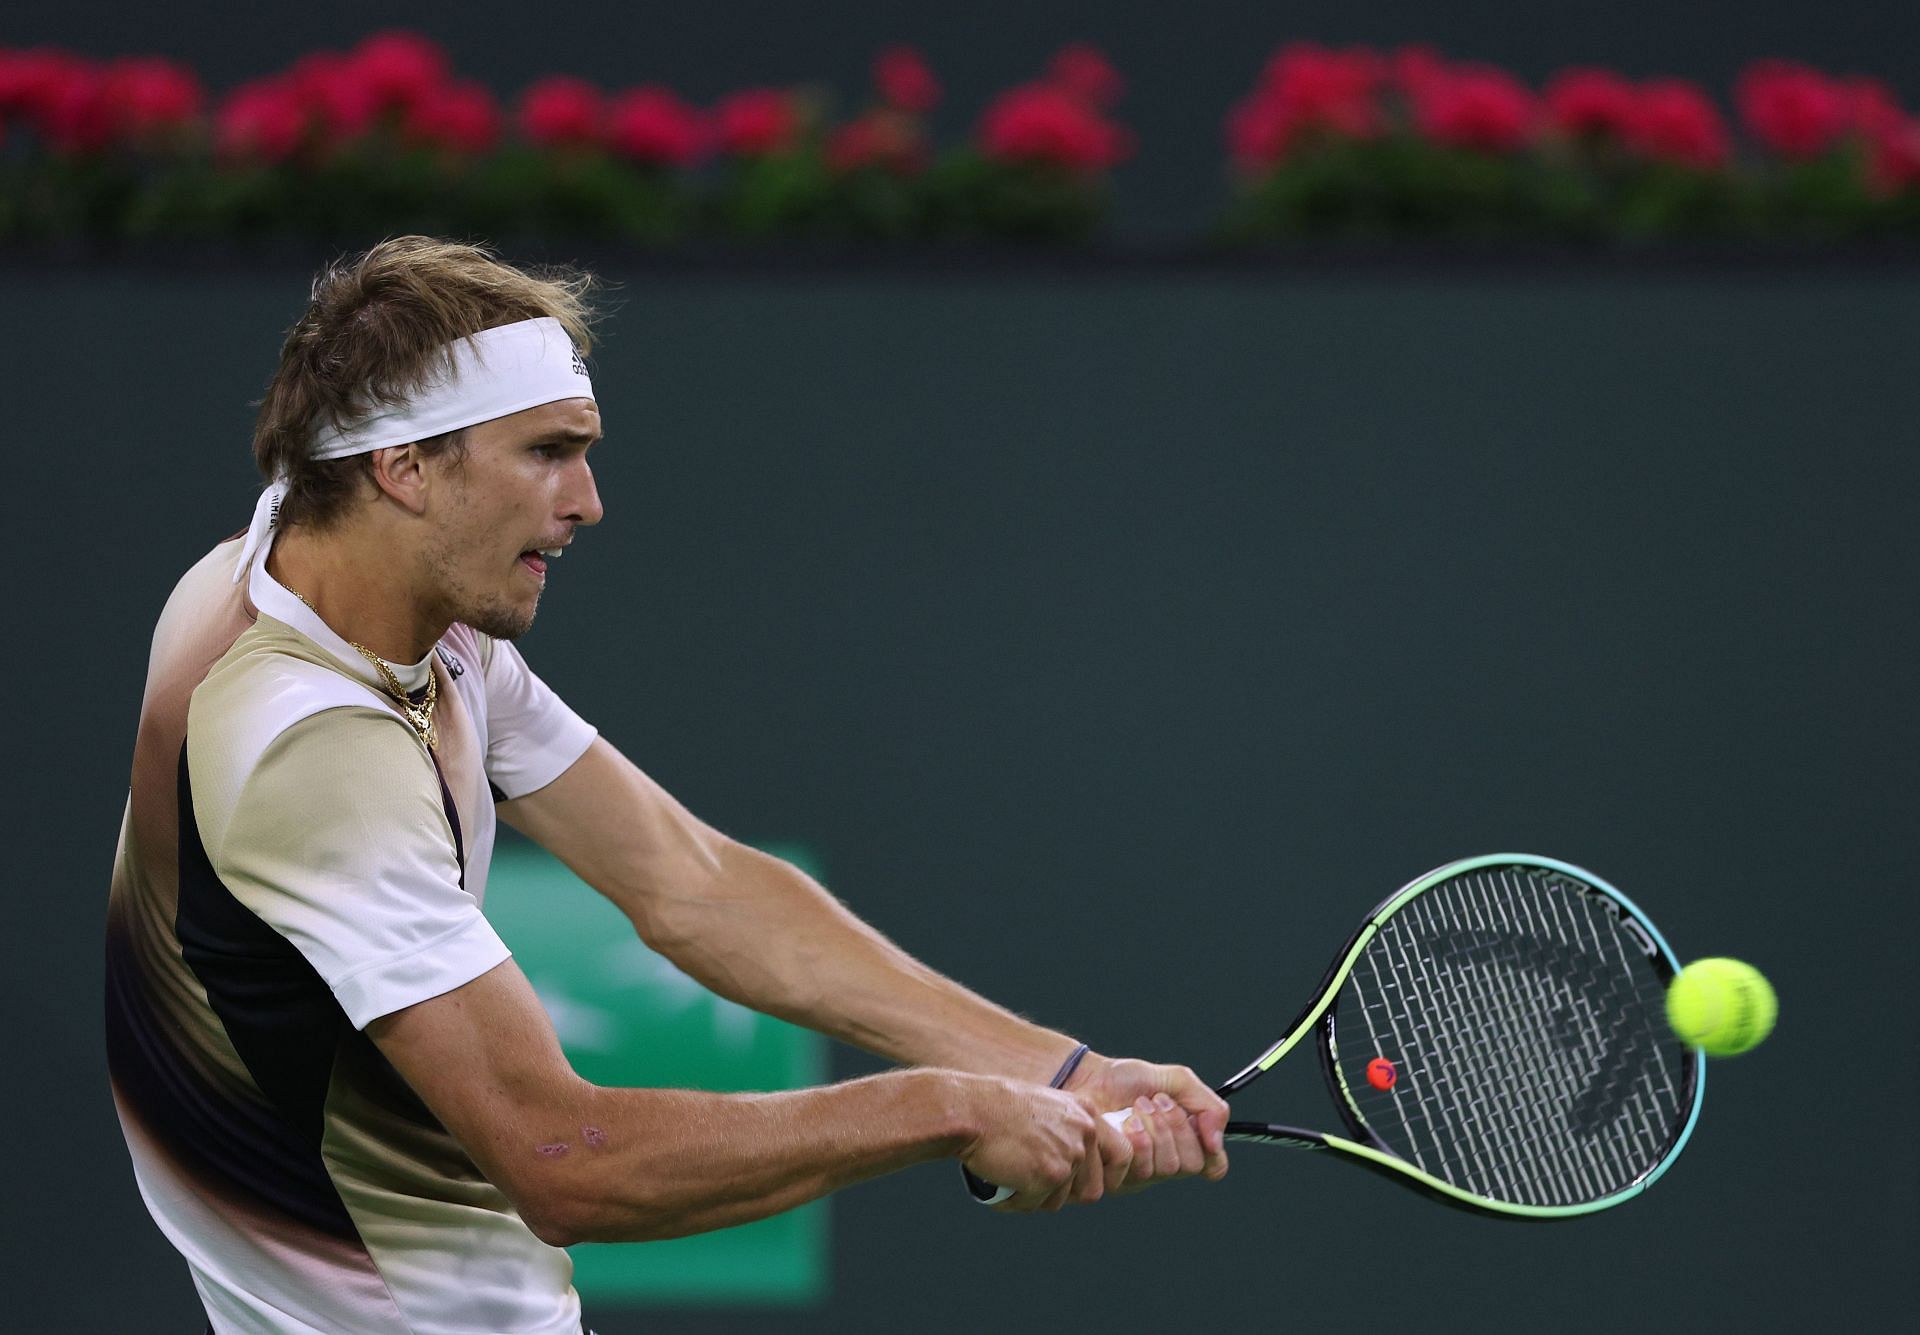 Alexander Zverev at the Indian Wells Masters